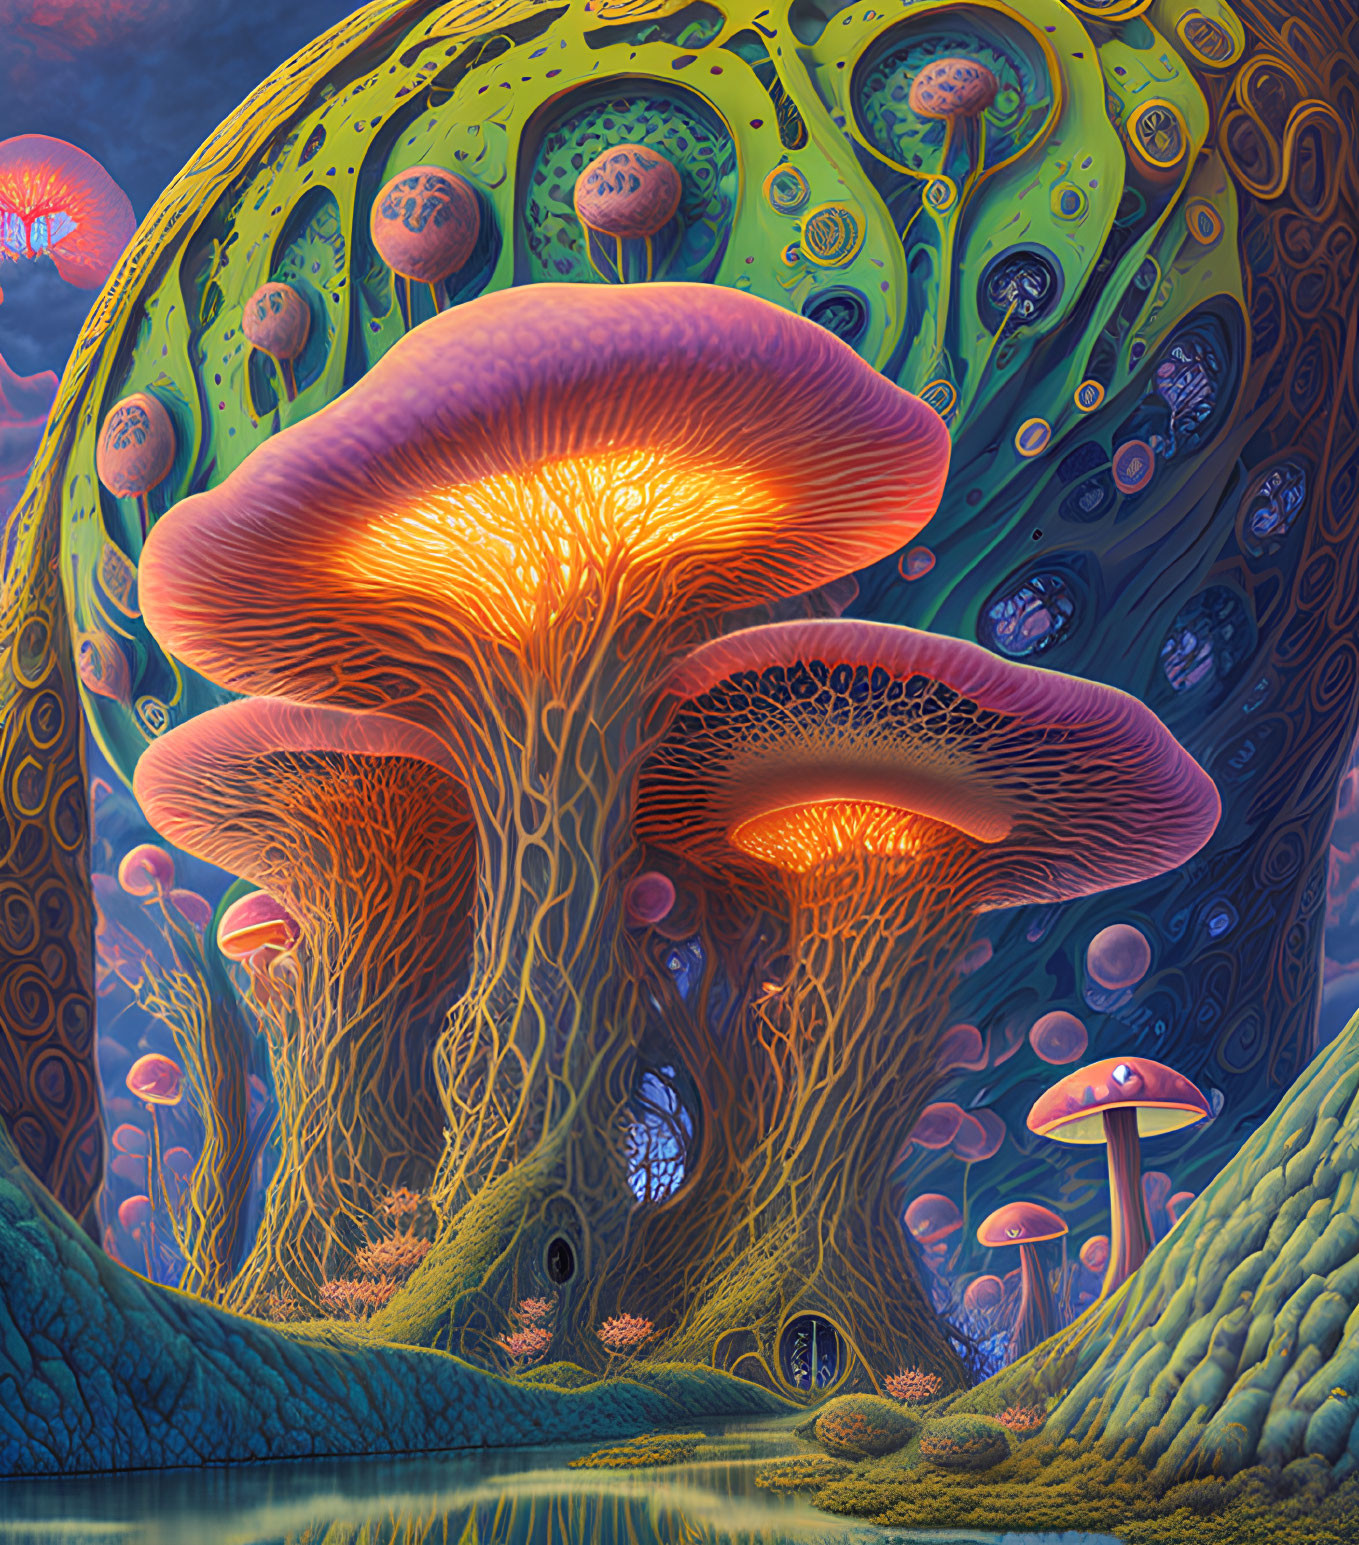 Fantastical landscape with oversized mushrooms and floating orbs